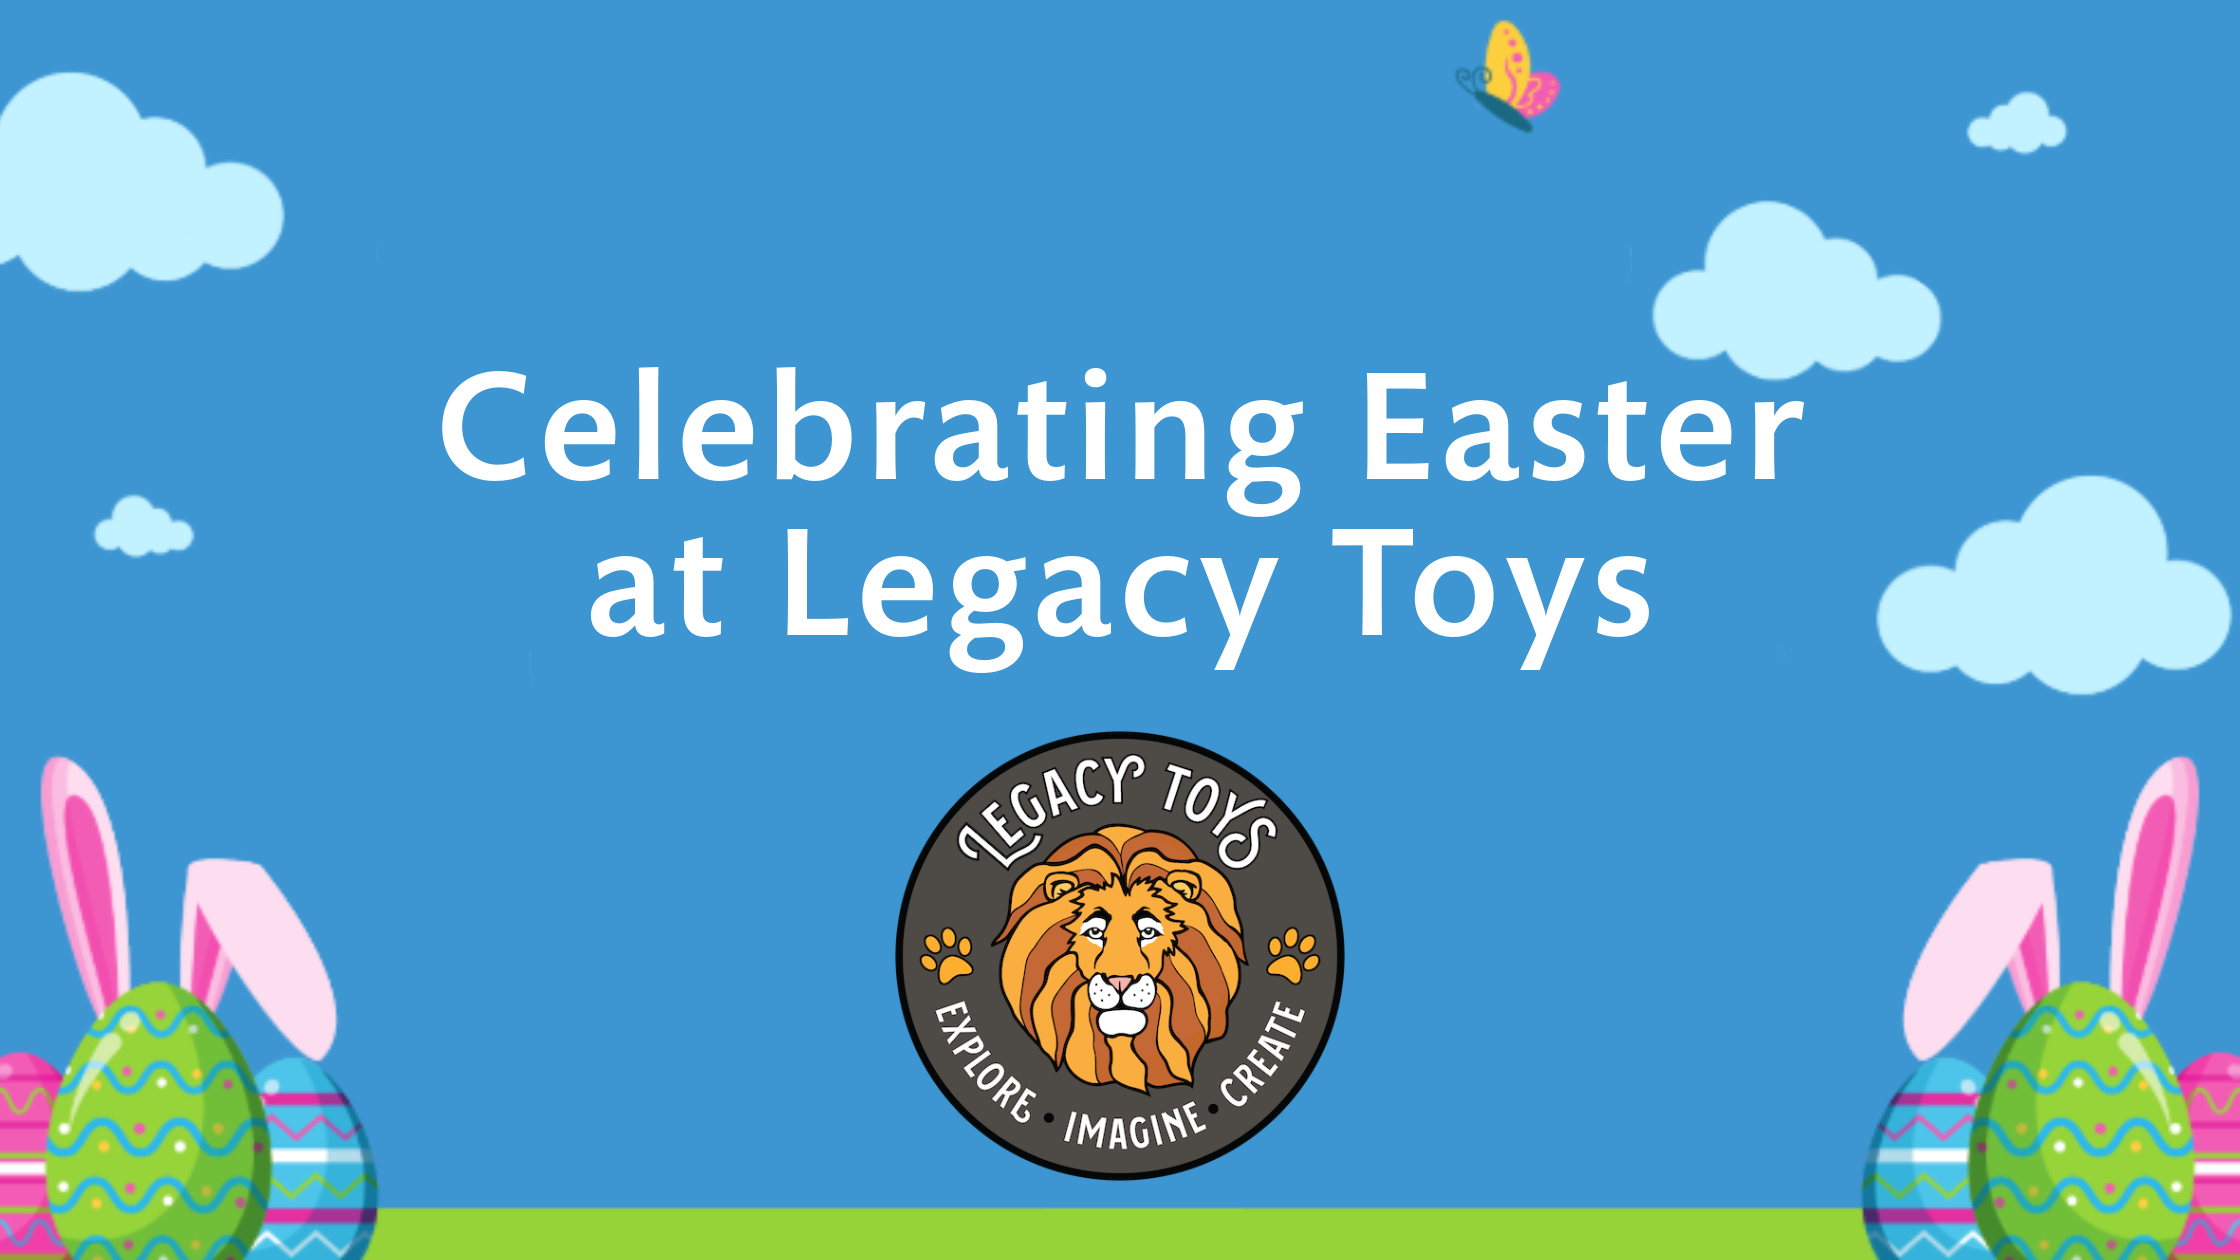 Hopping into Spring: Easter favorites from Legacy Toys at Legacy Toys